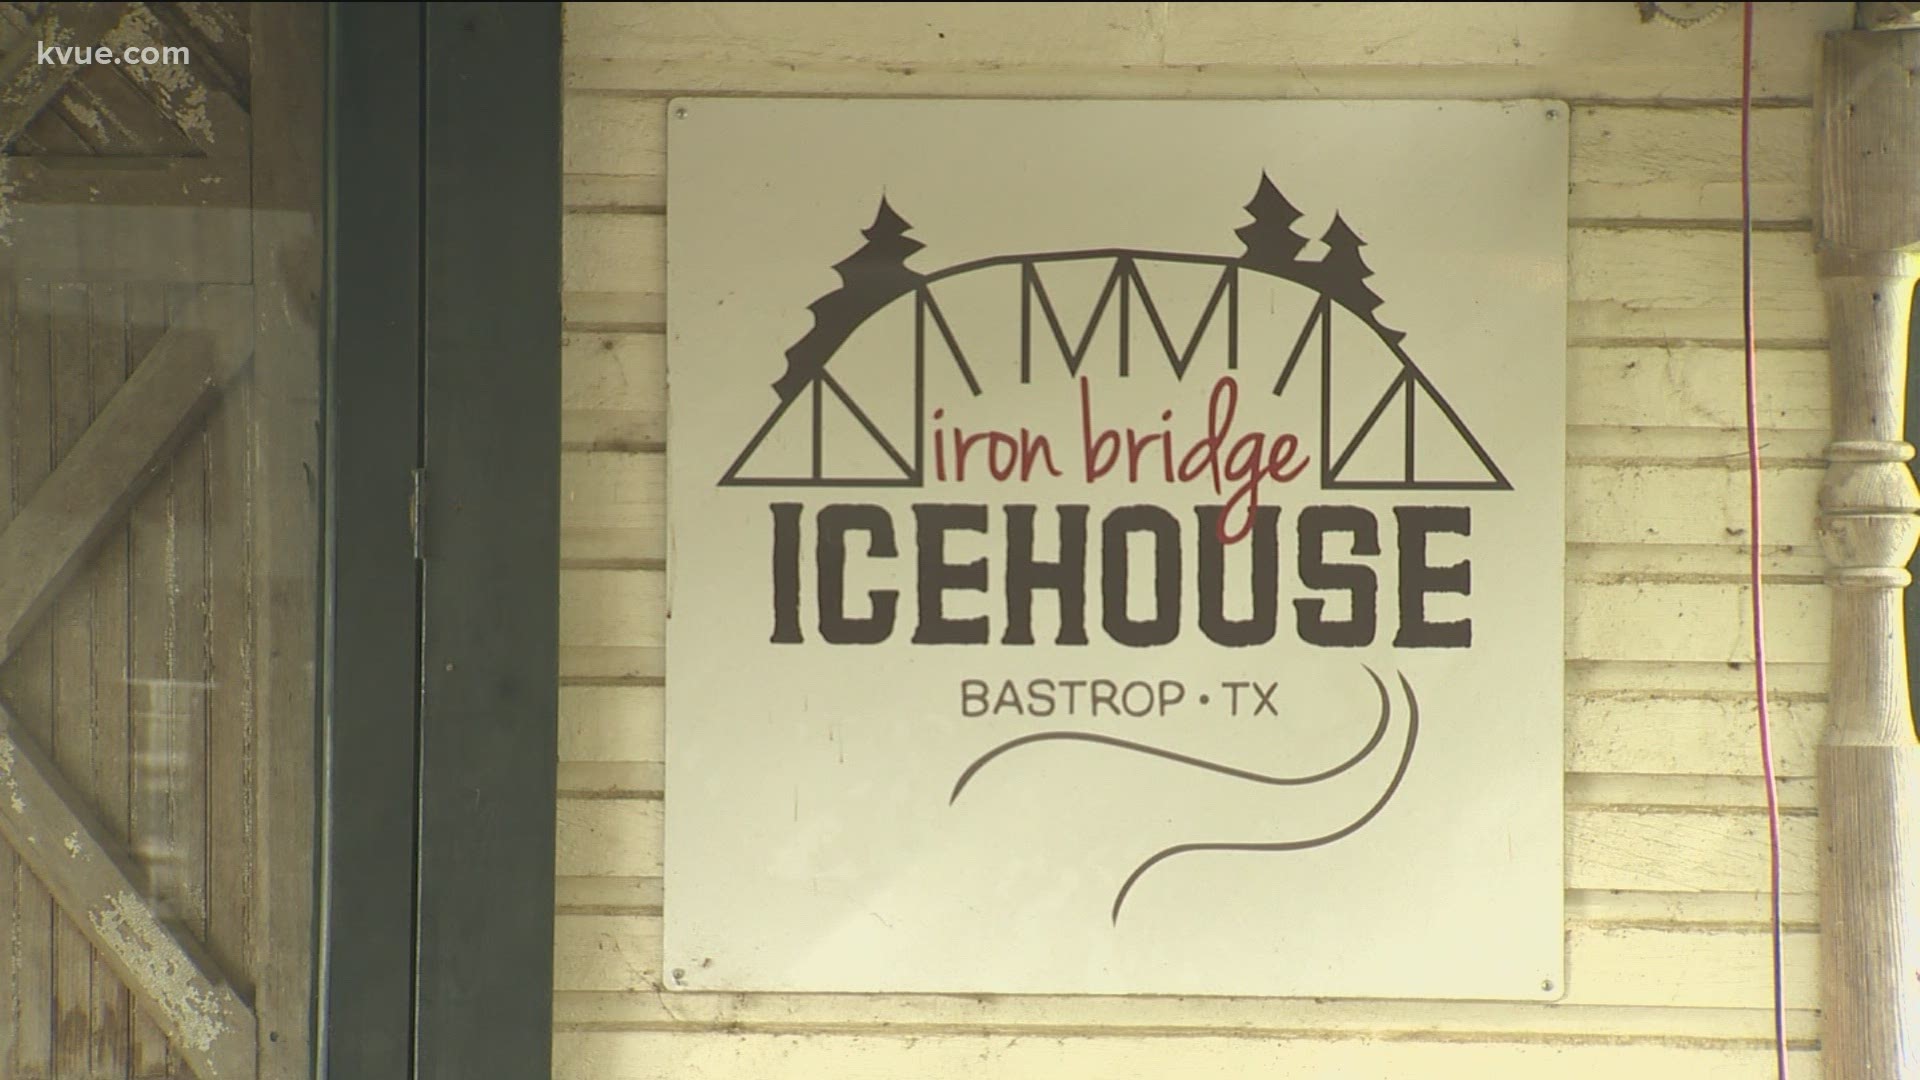 KVUE's Bryce Newberry met up with the owners of a favorite local restaurant.